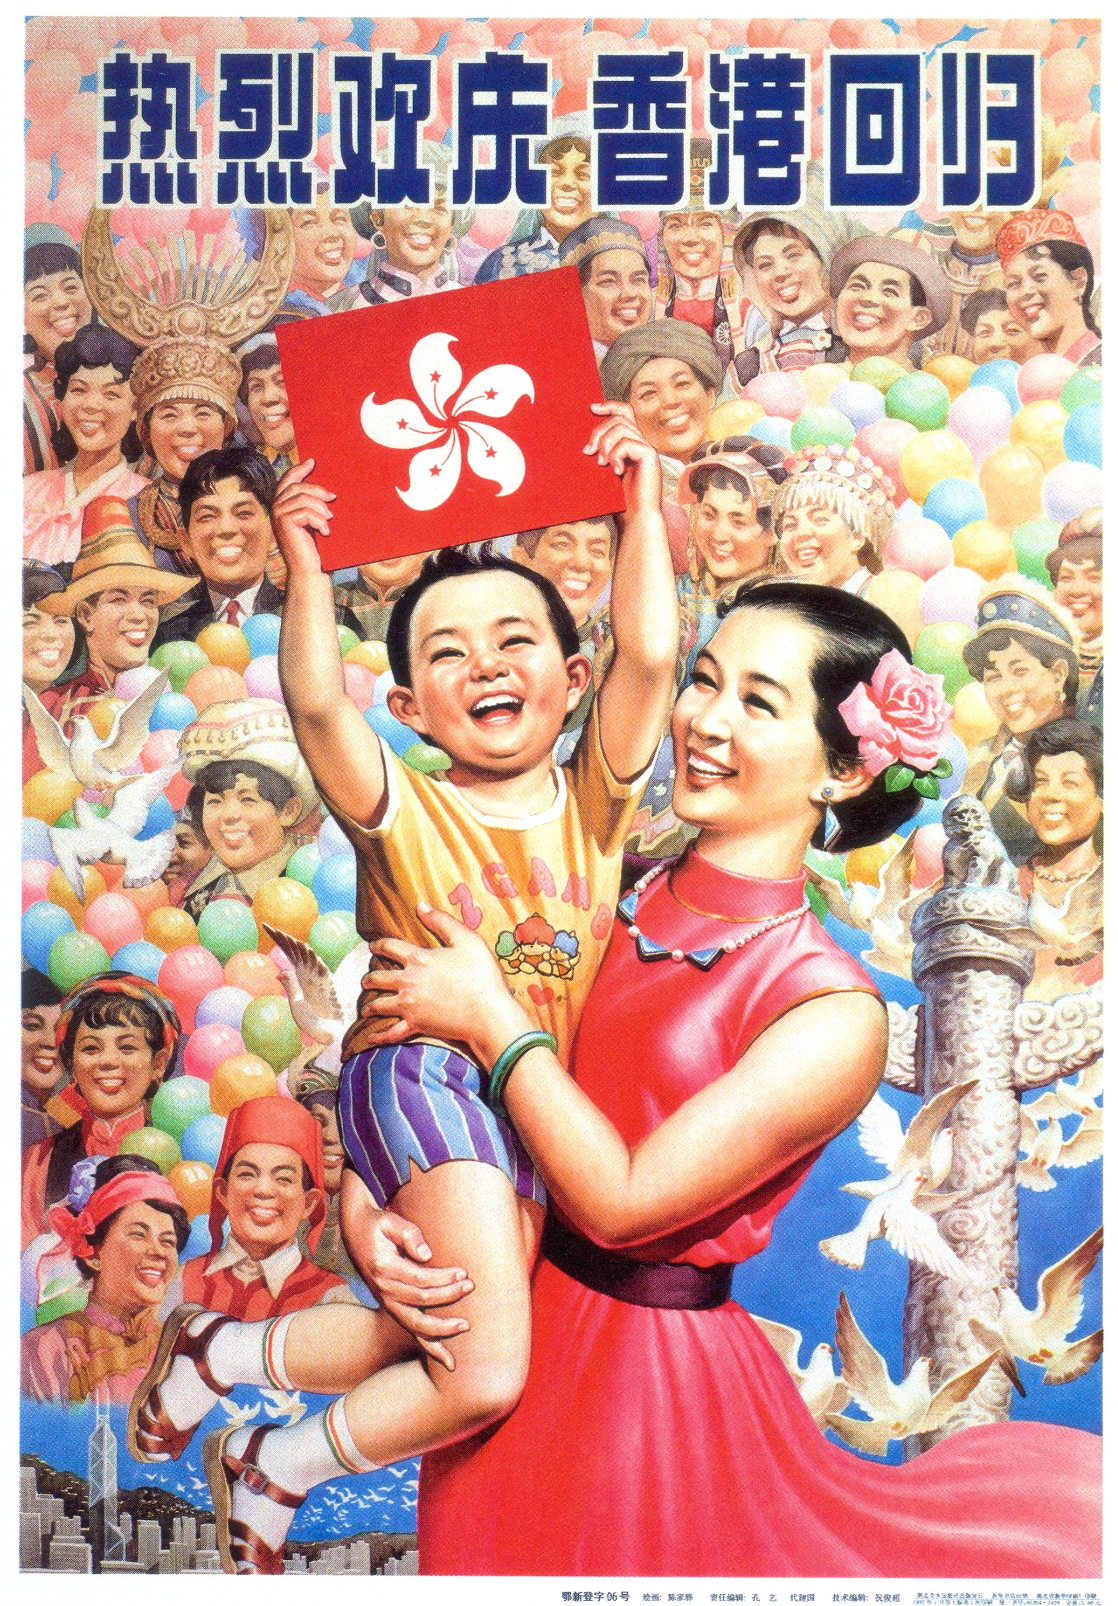 Enthusiastically celebrate the return of Hong Kong — Chinese poster